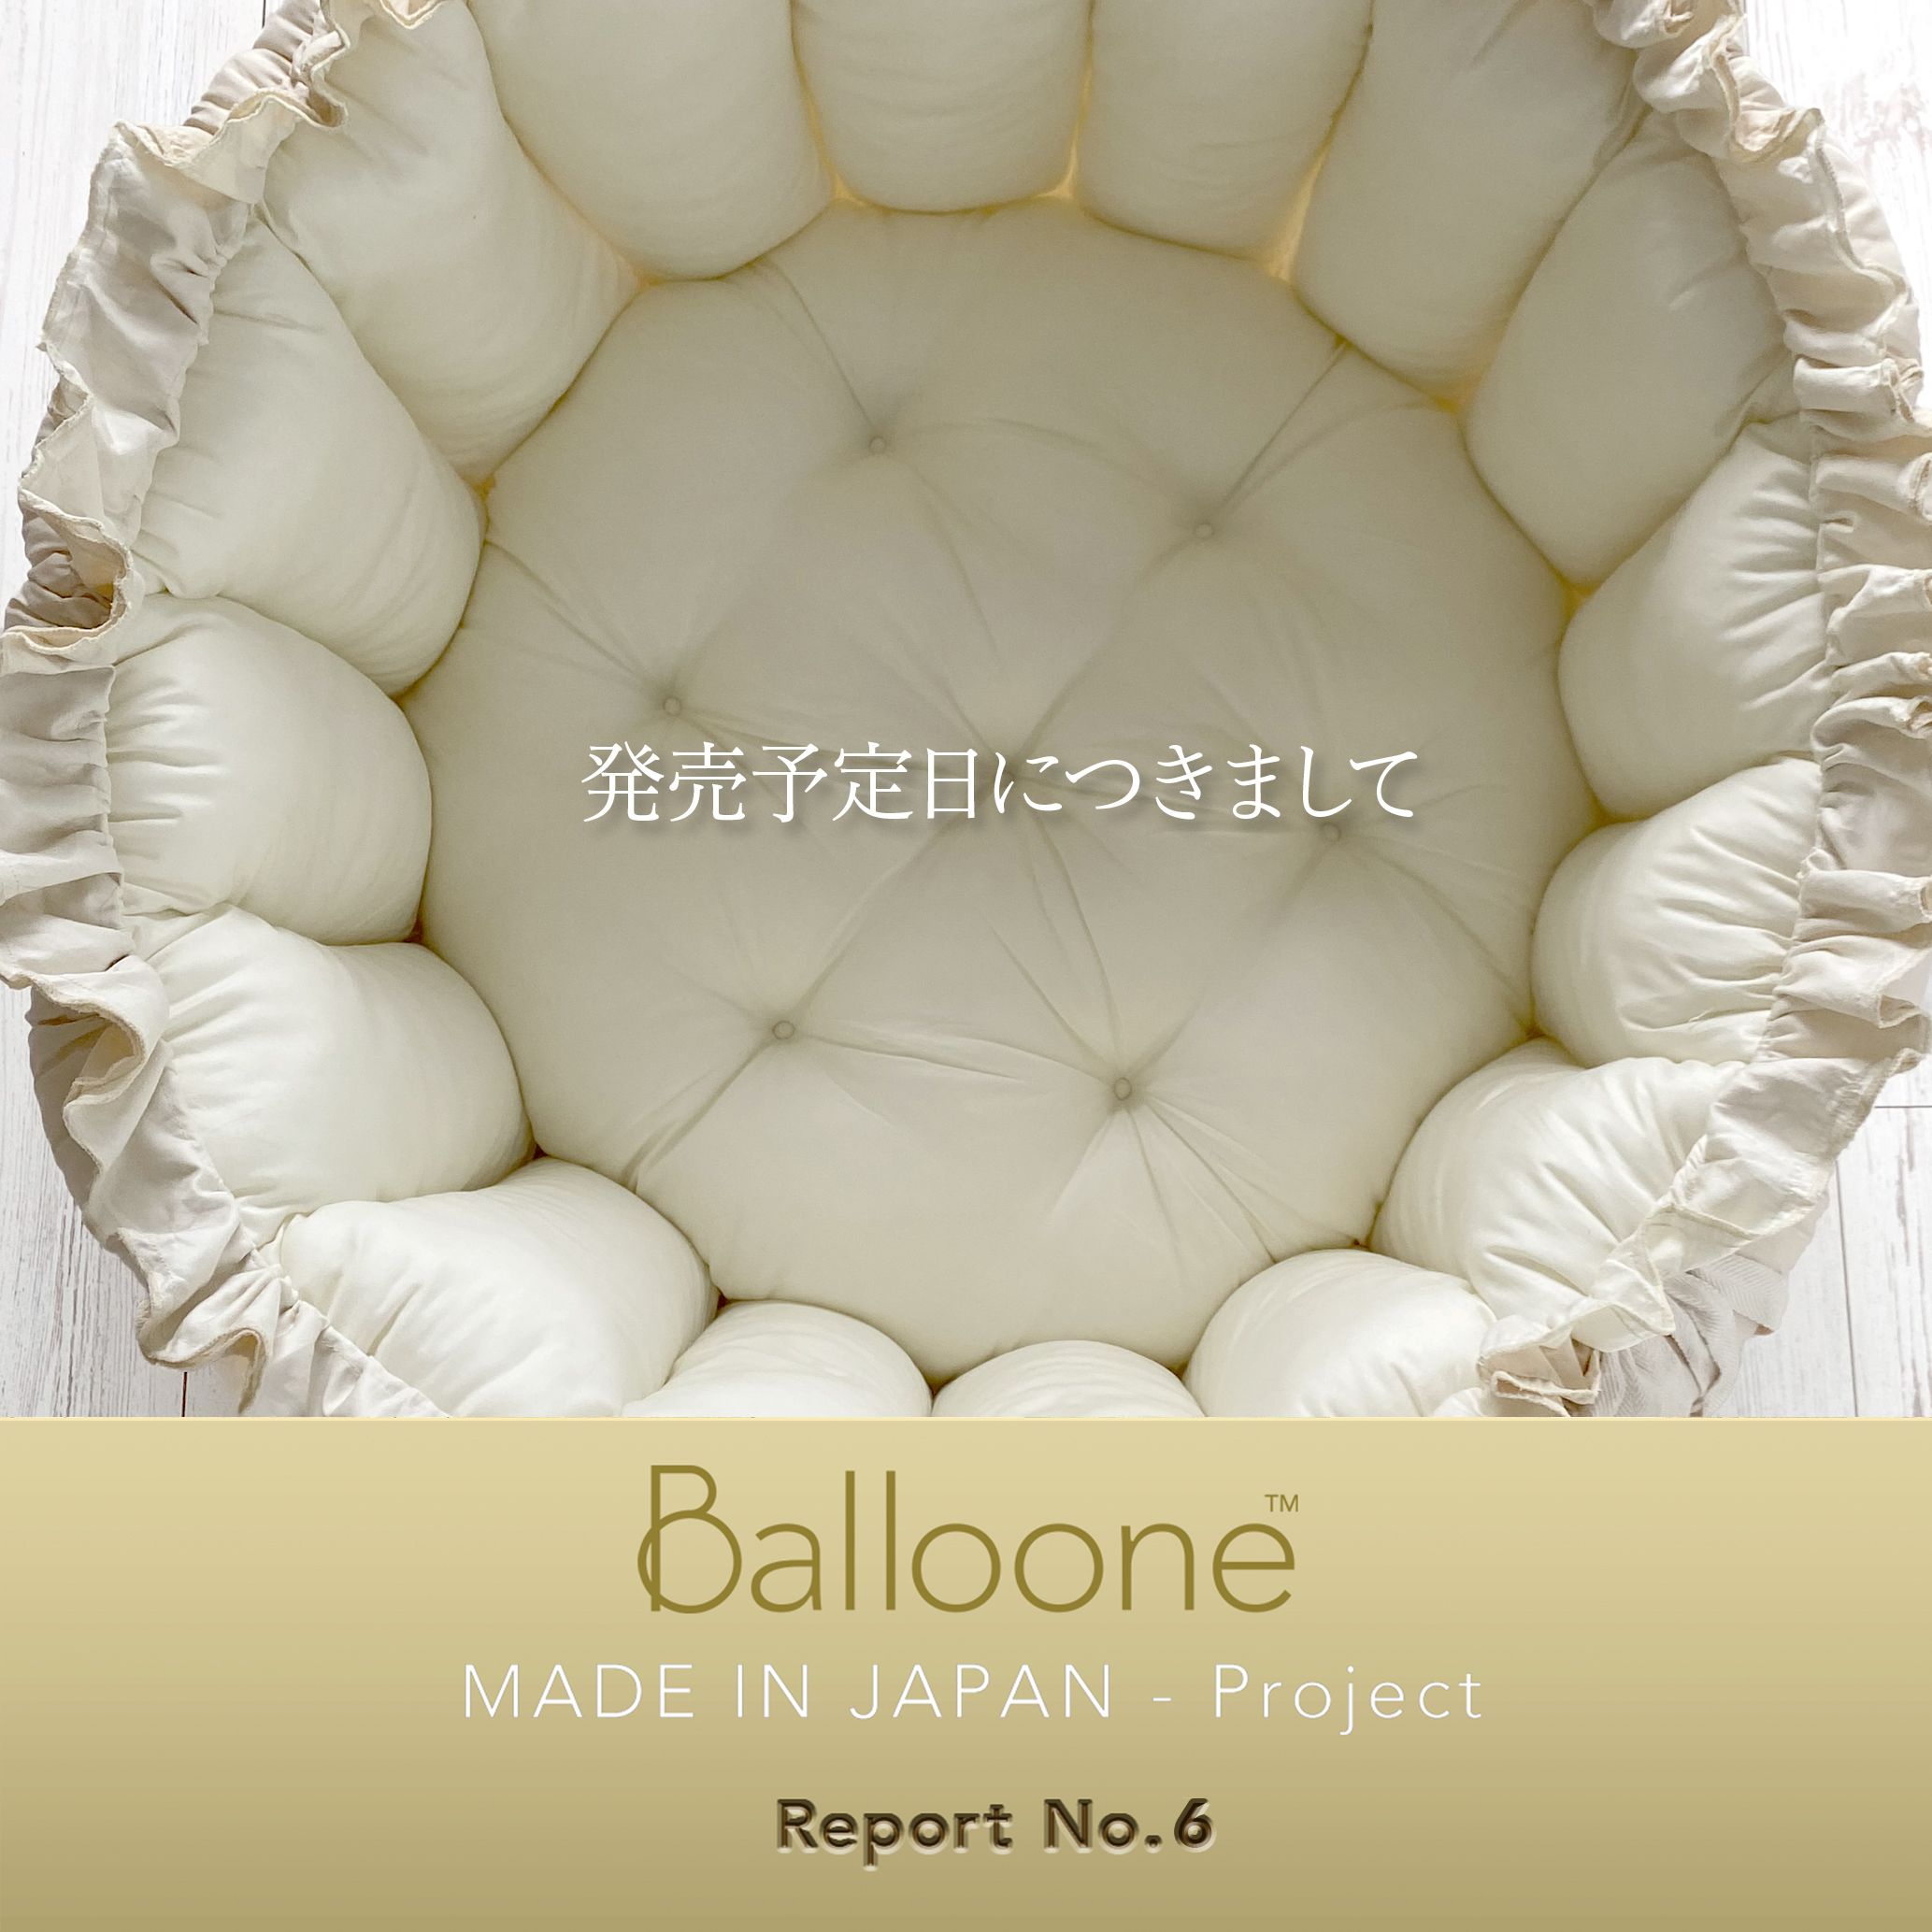 【Balloone／Made in Japan プロジェクト】リポート No.6